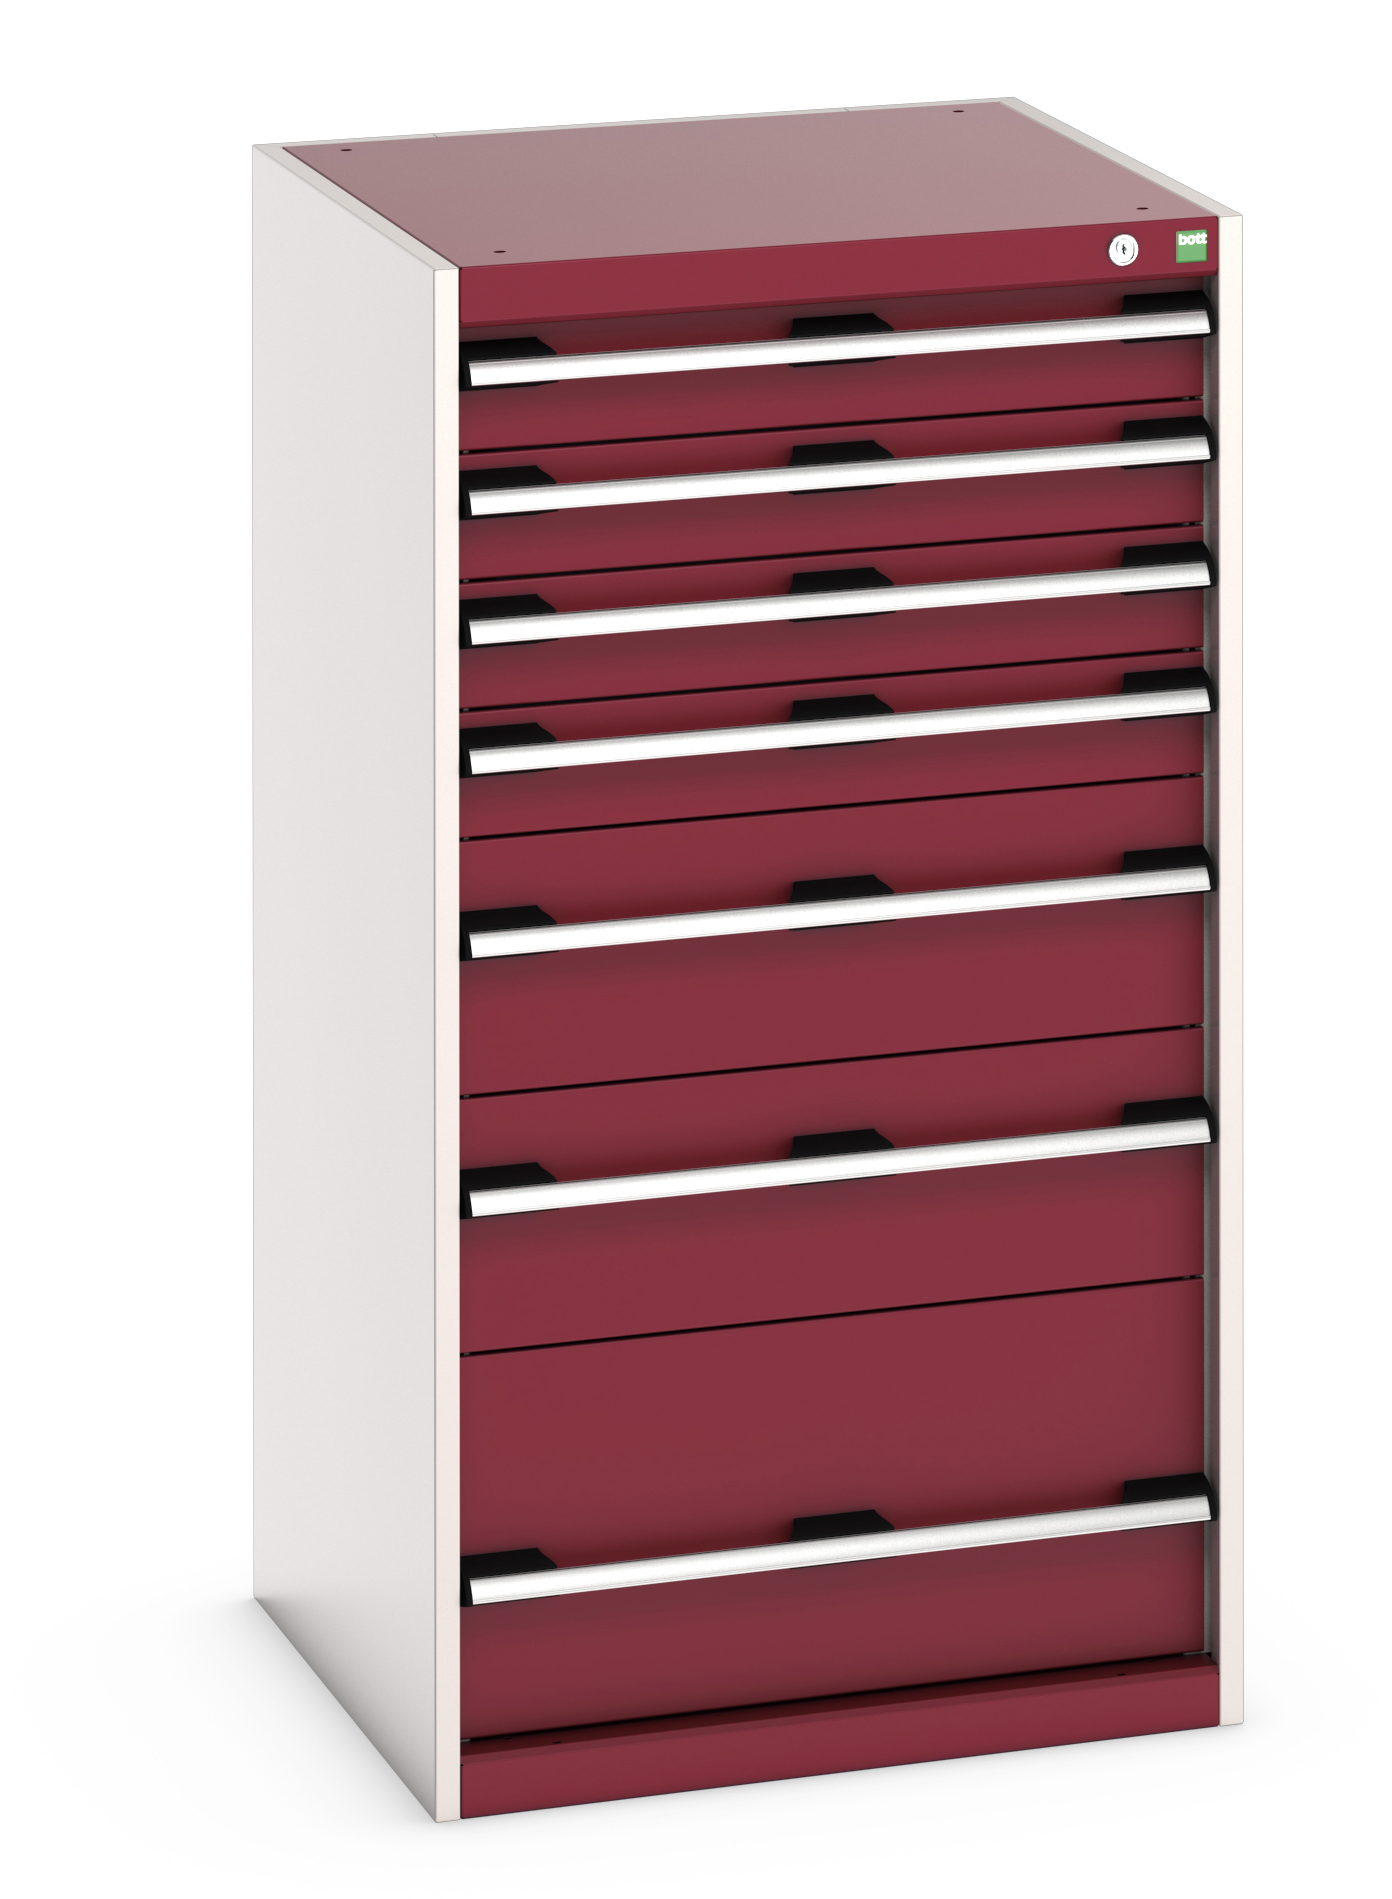 Bott Cubio Drawer Cabinet With 7 Drawers - 40019069.24V